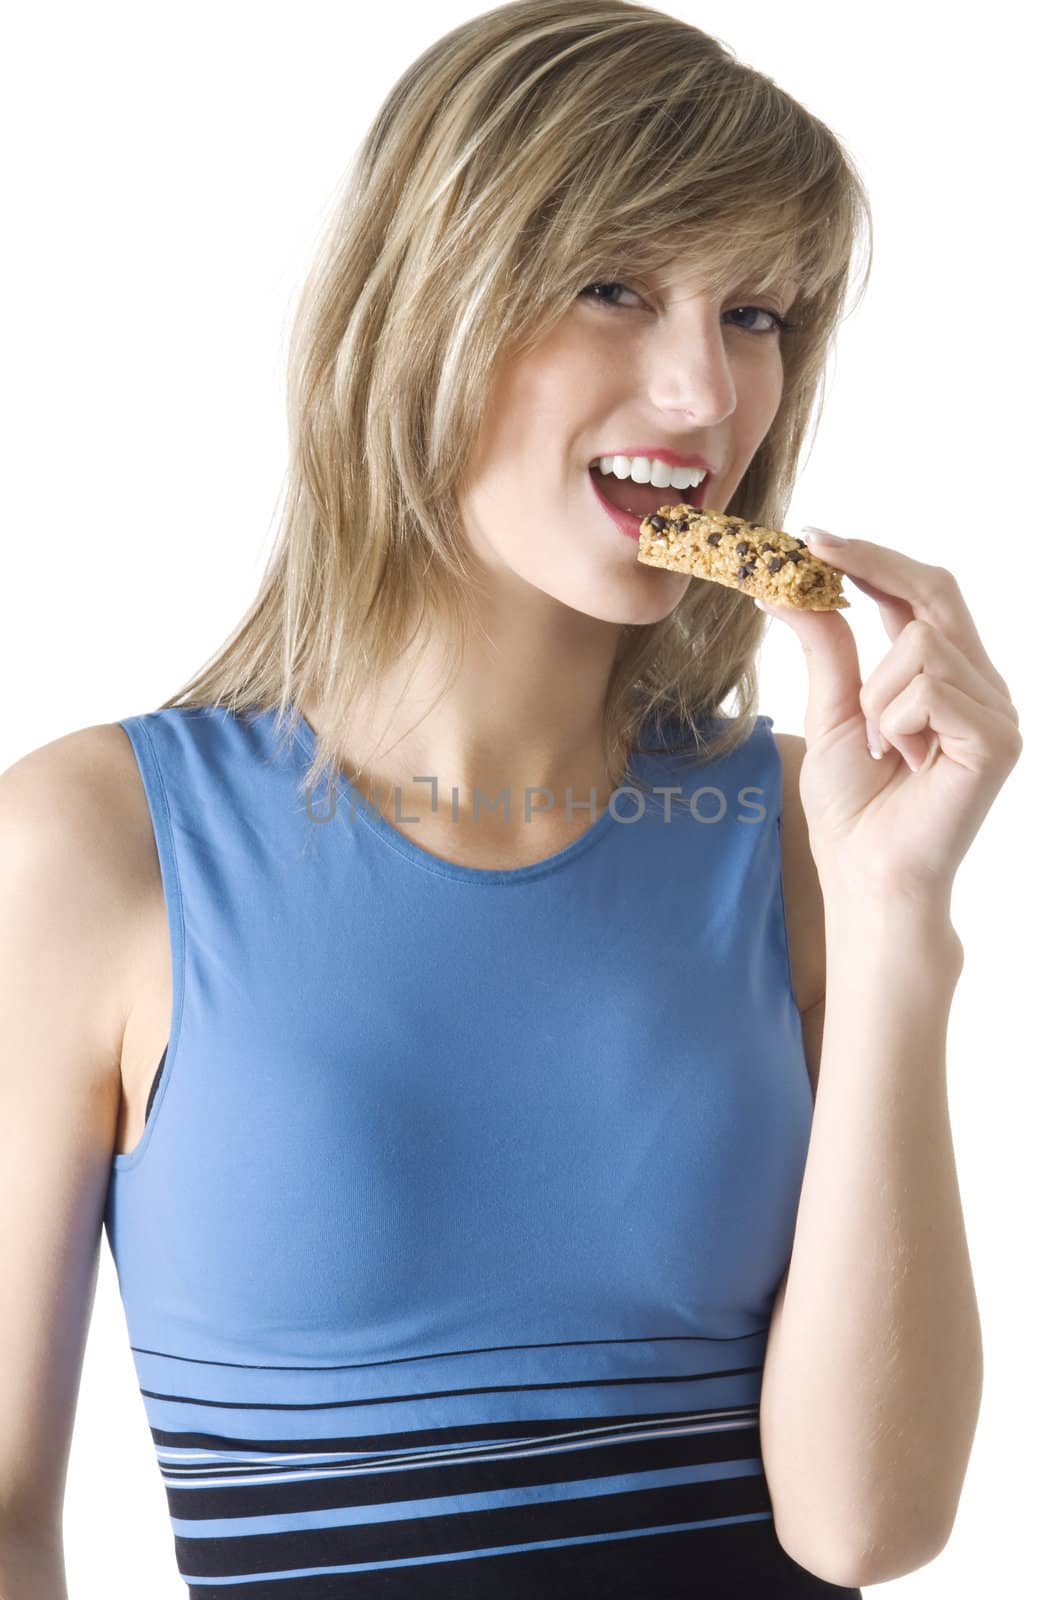 blond girl in blue chemise eating a diet tablet and smiling